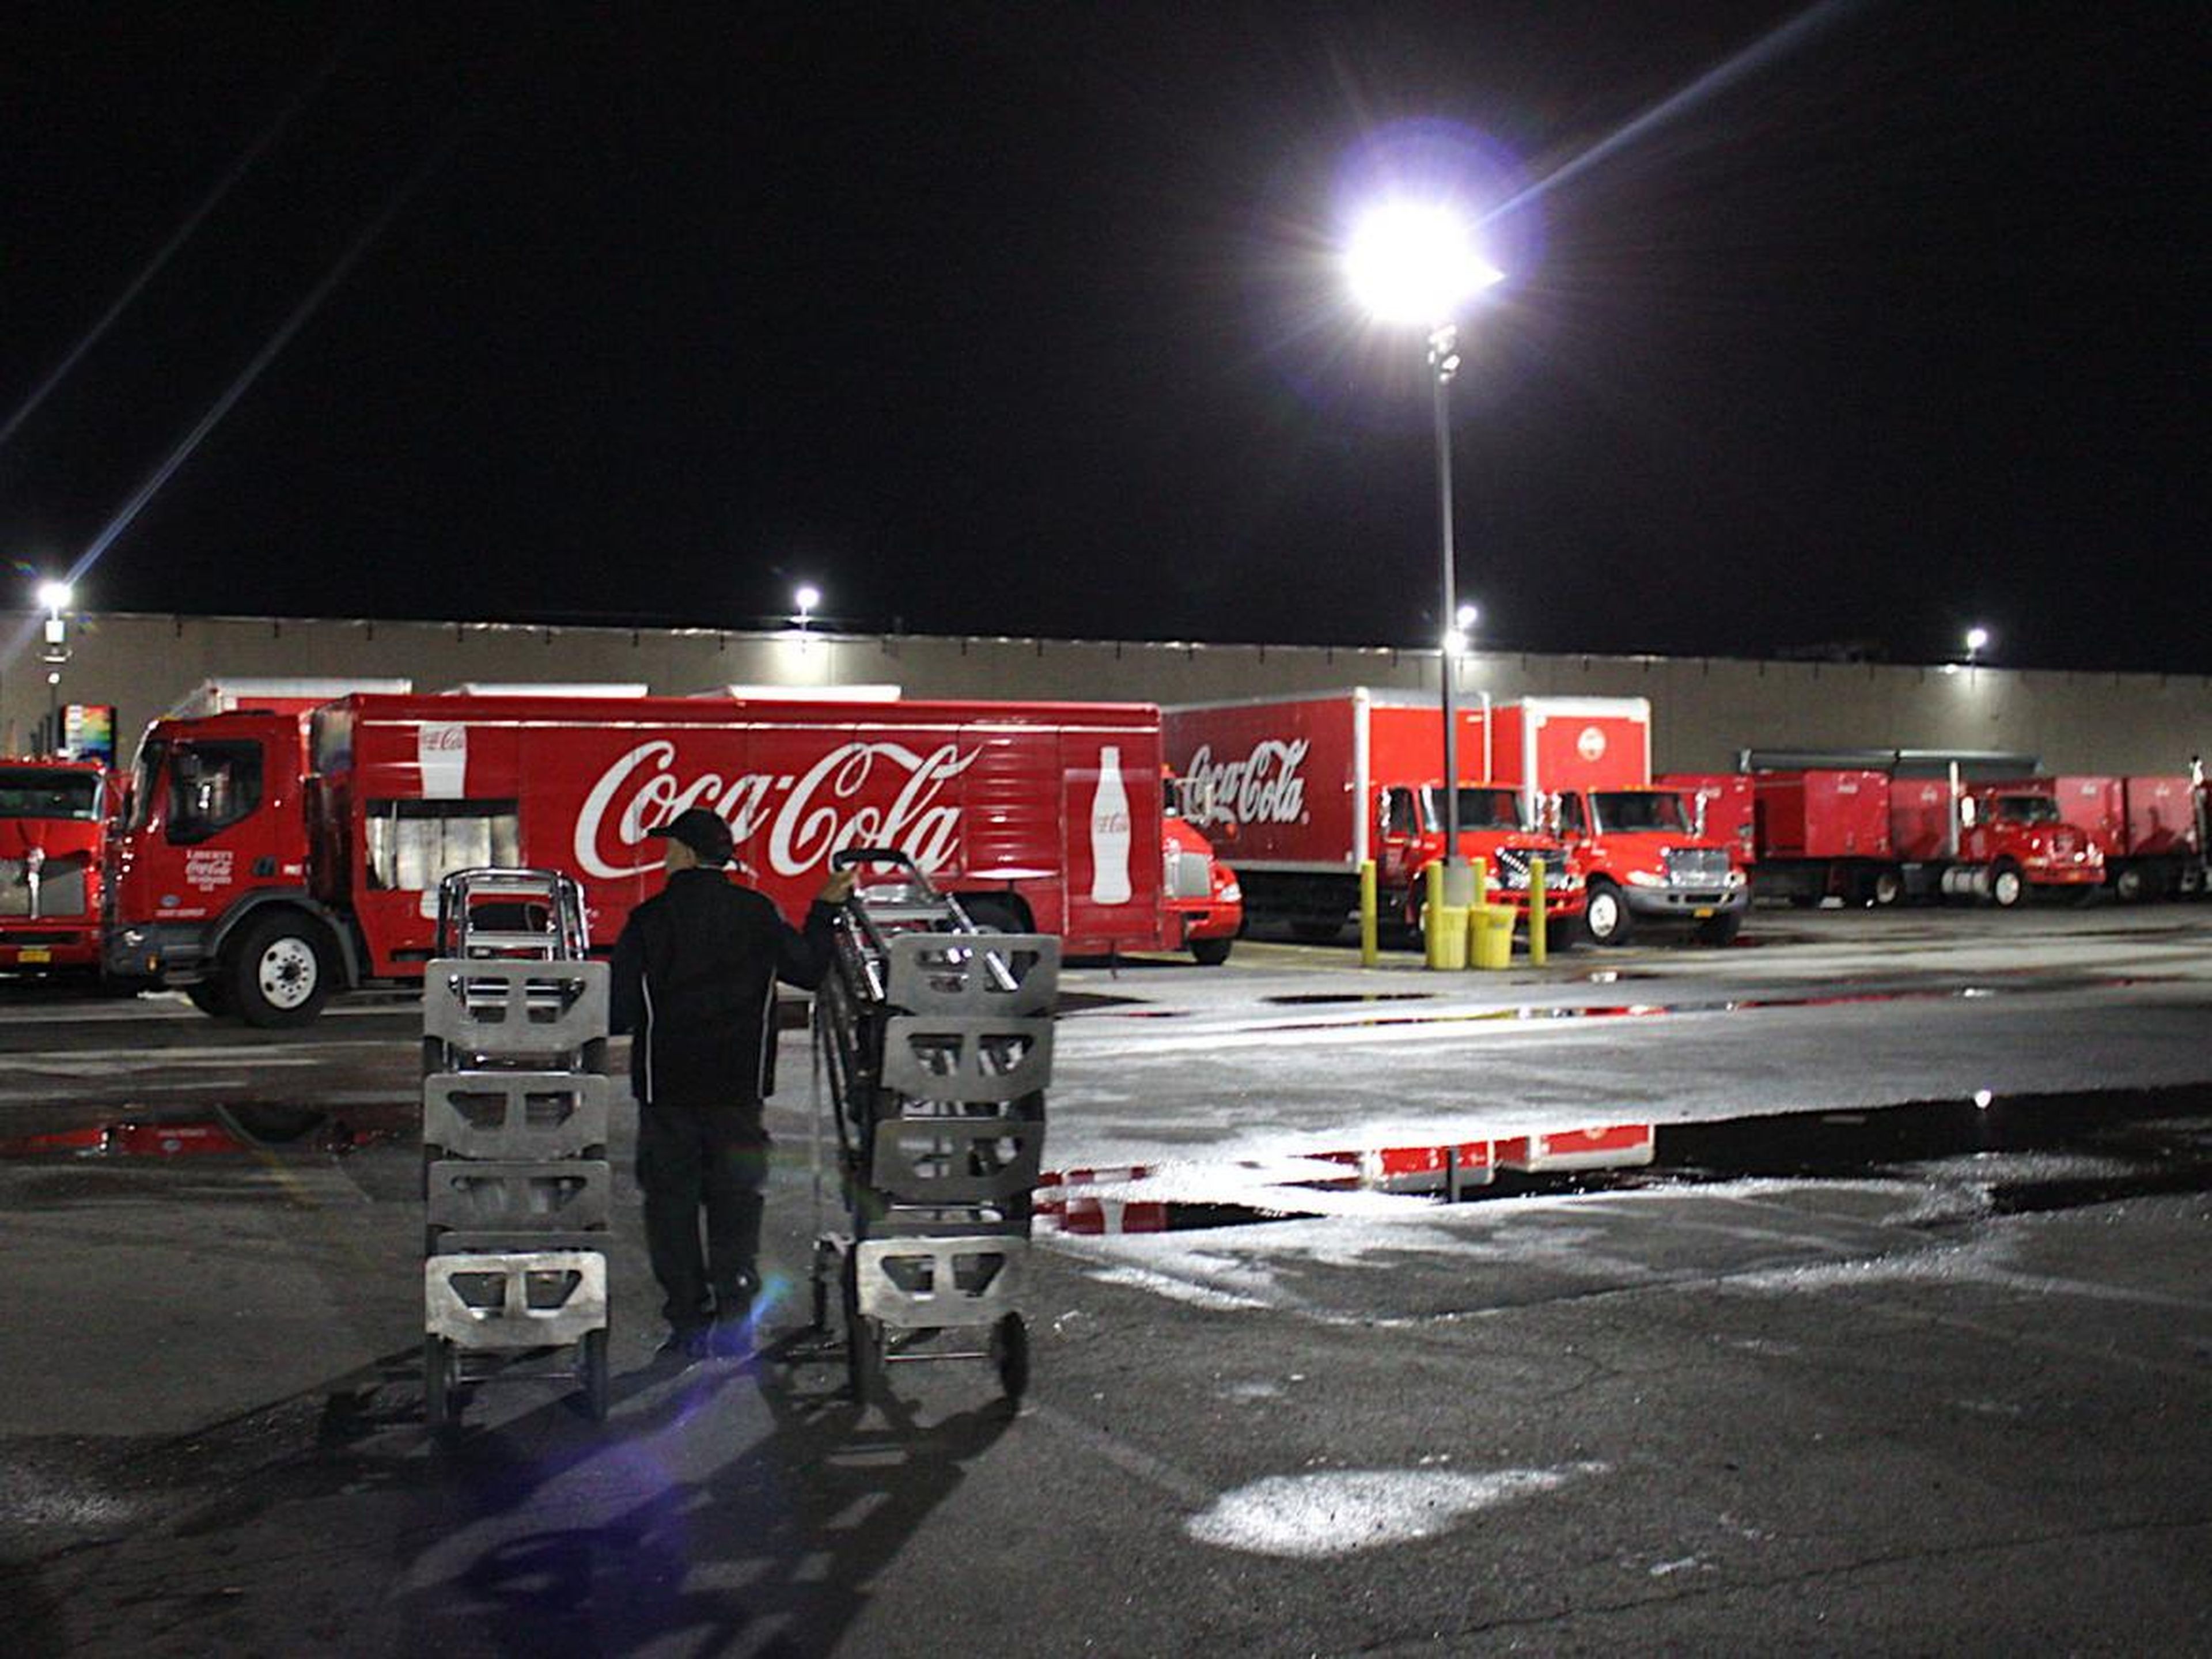 Santiago's truck changes every day, and his vehicle is already loaded by the time he gets in at 4 a.m. He just needs to load carts in the truck and do some final checks.